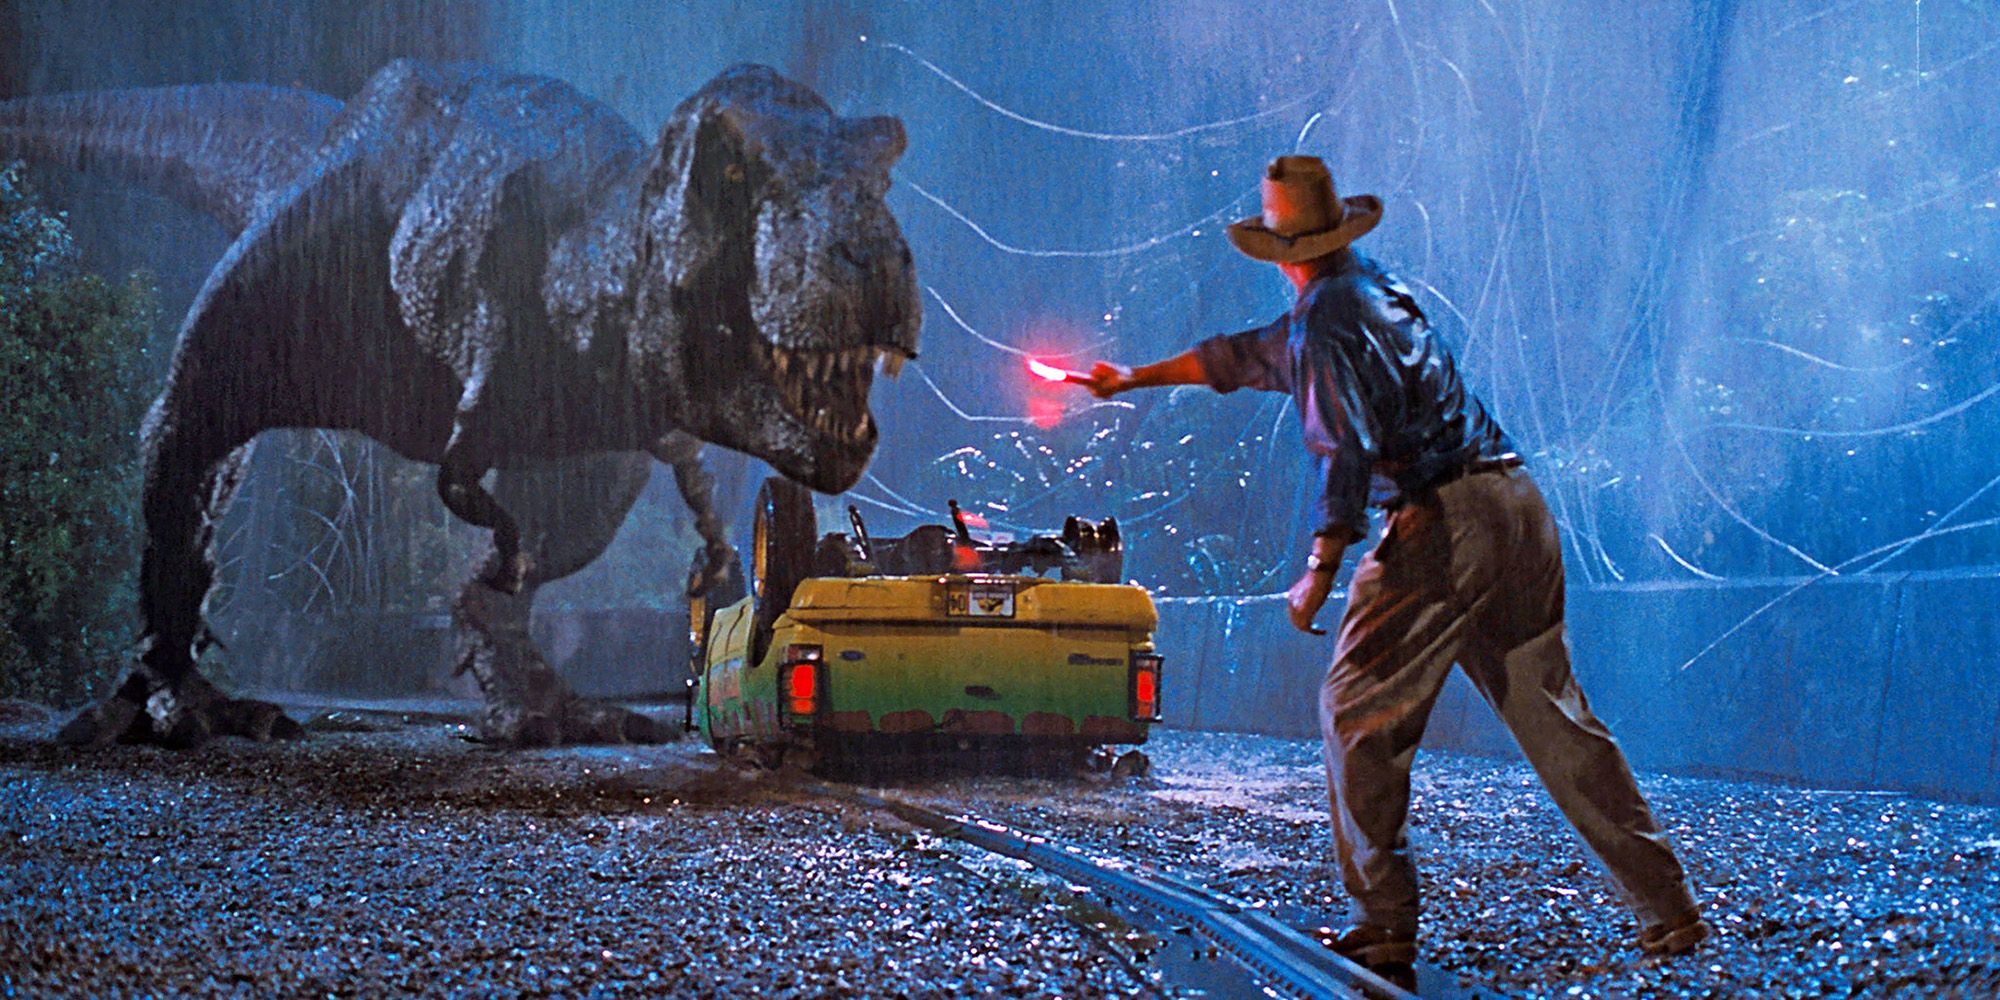 Alan Grant faces off against a T-rex in Jurassic Park